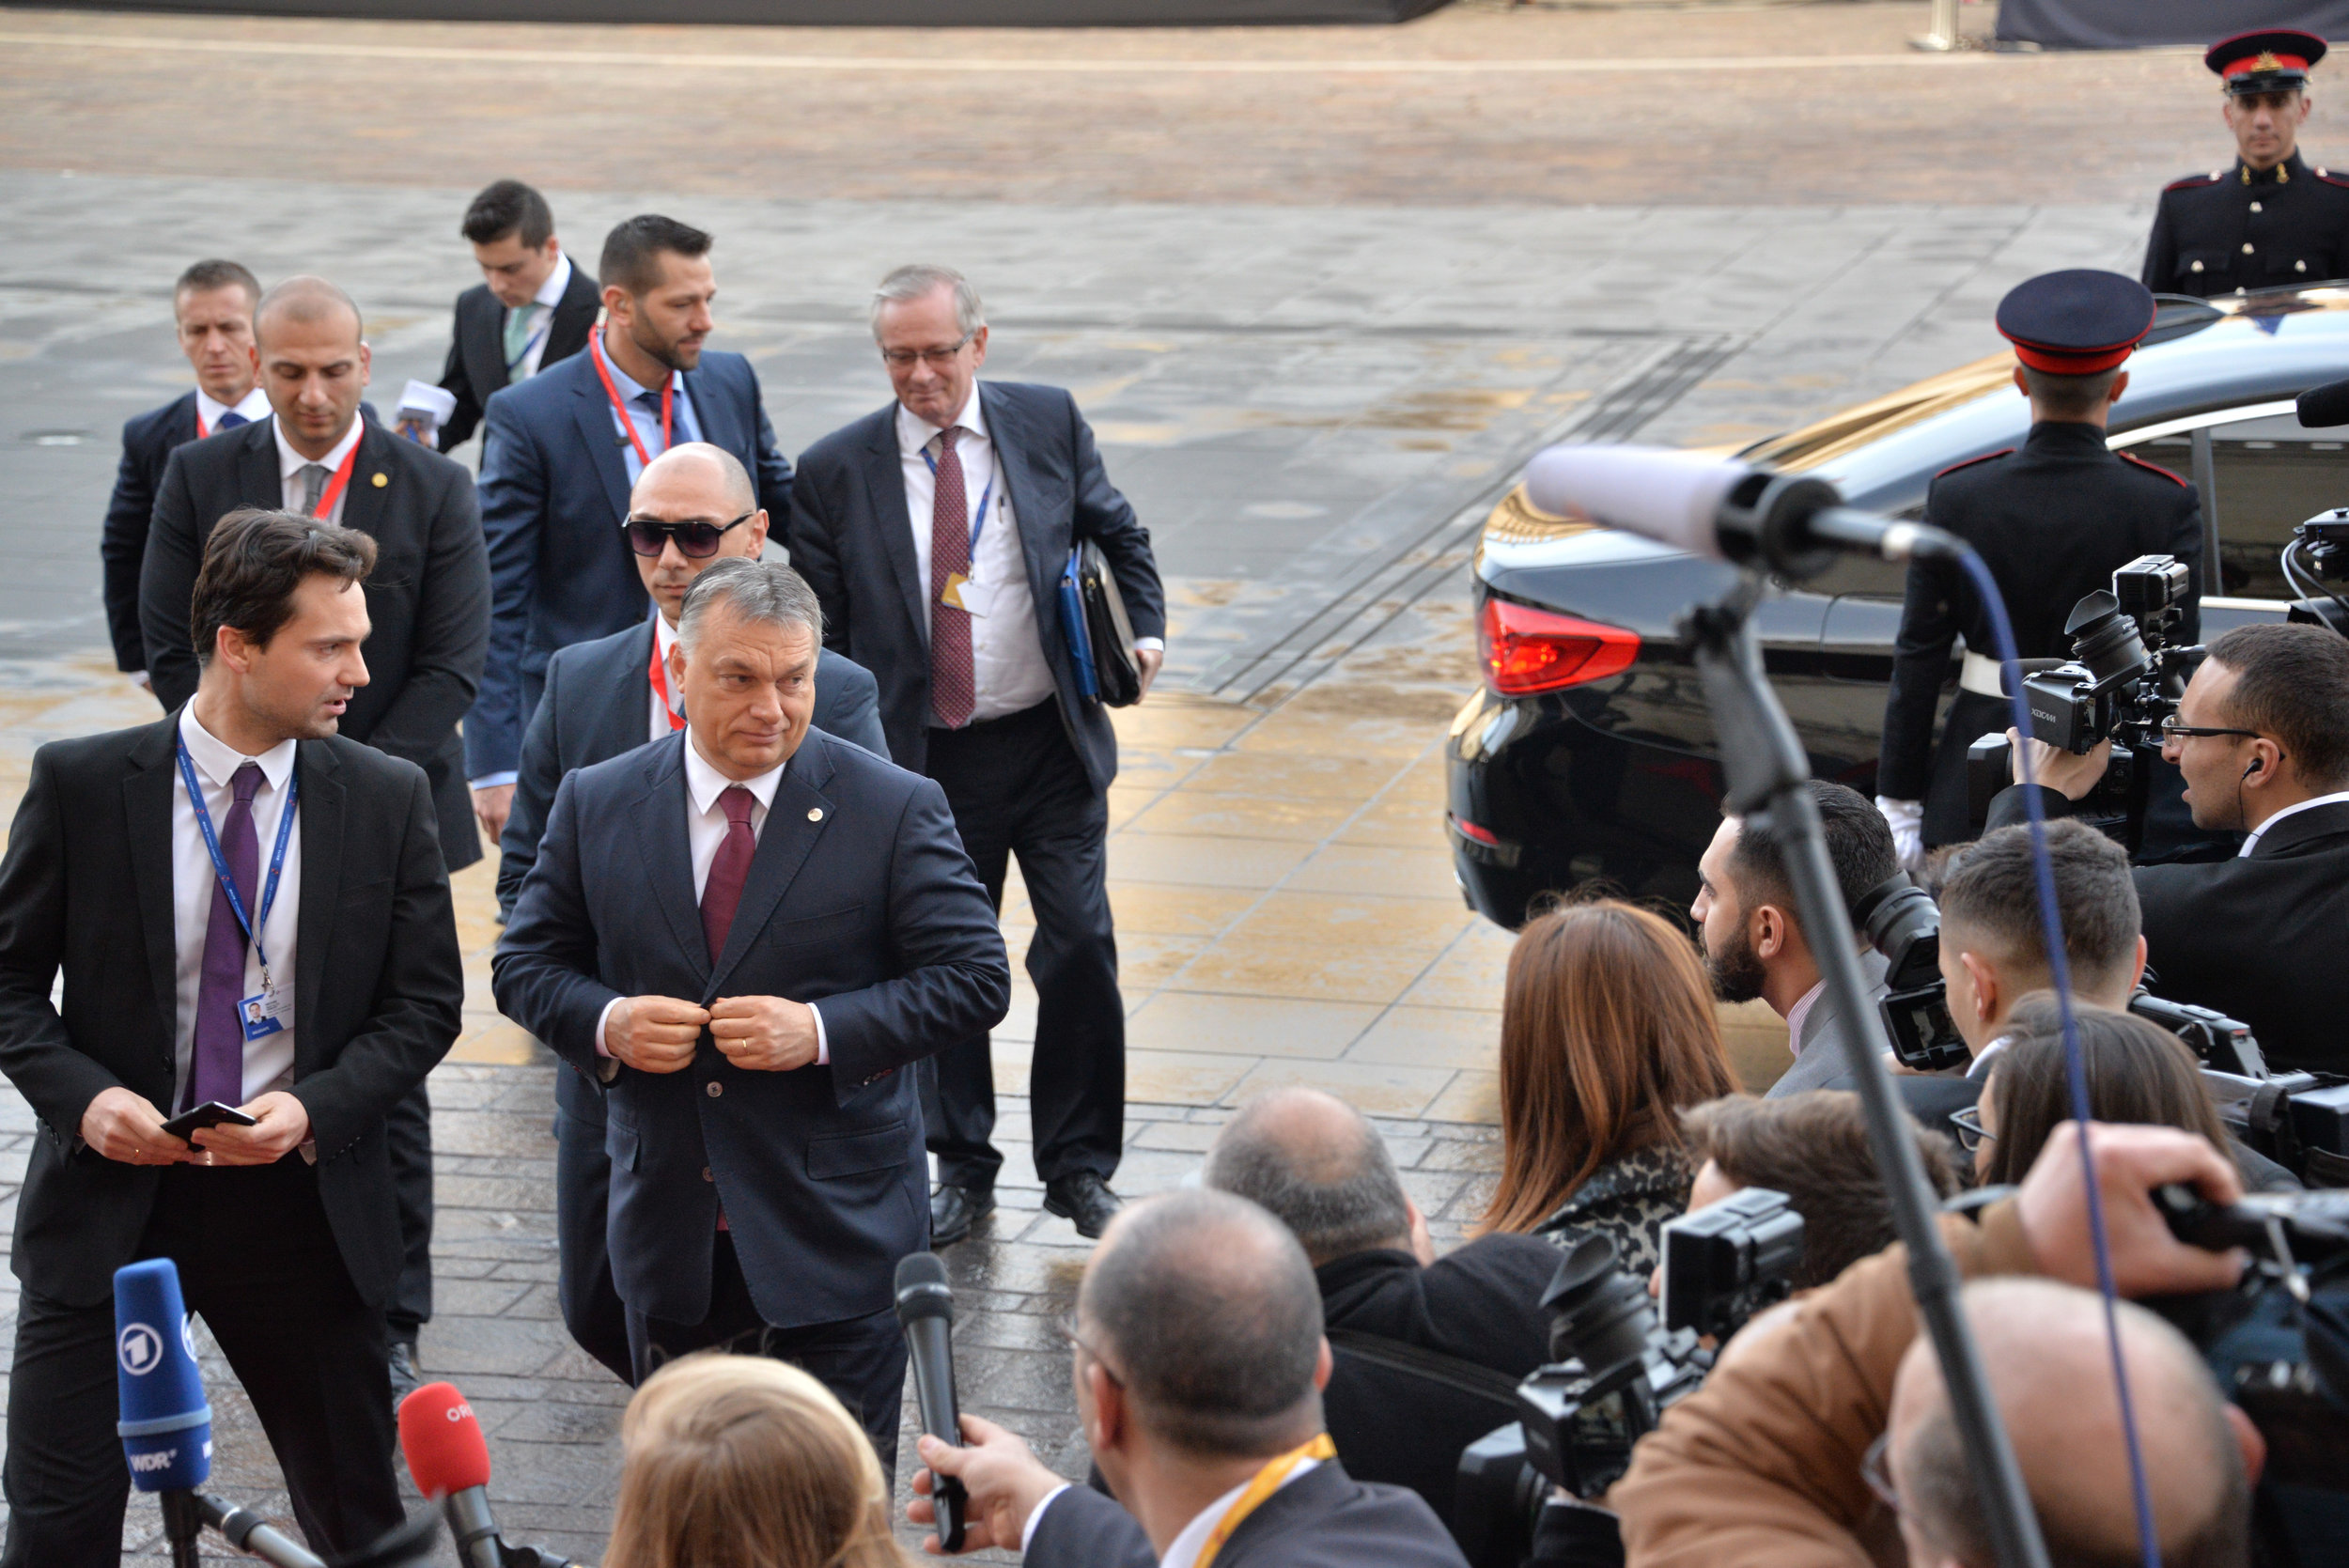  Hungarian Prime Minister Viktor Orbán arrives at a summit of the European Council in Valletta, Malta, Friday, Feb. 3, 2017. A continued flow of migrants from the Middle East and Africa is pressuring the European Council to act with some calling for 